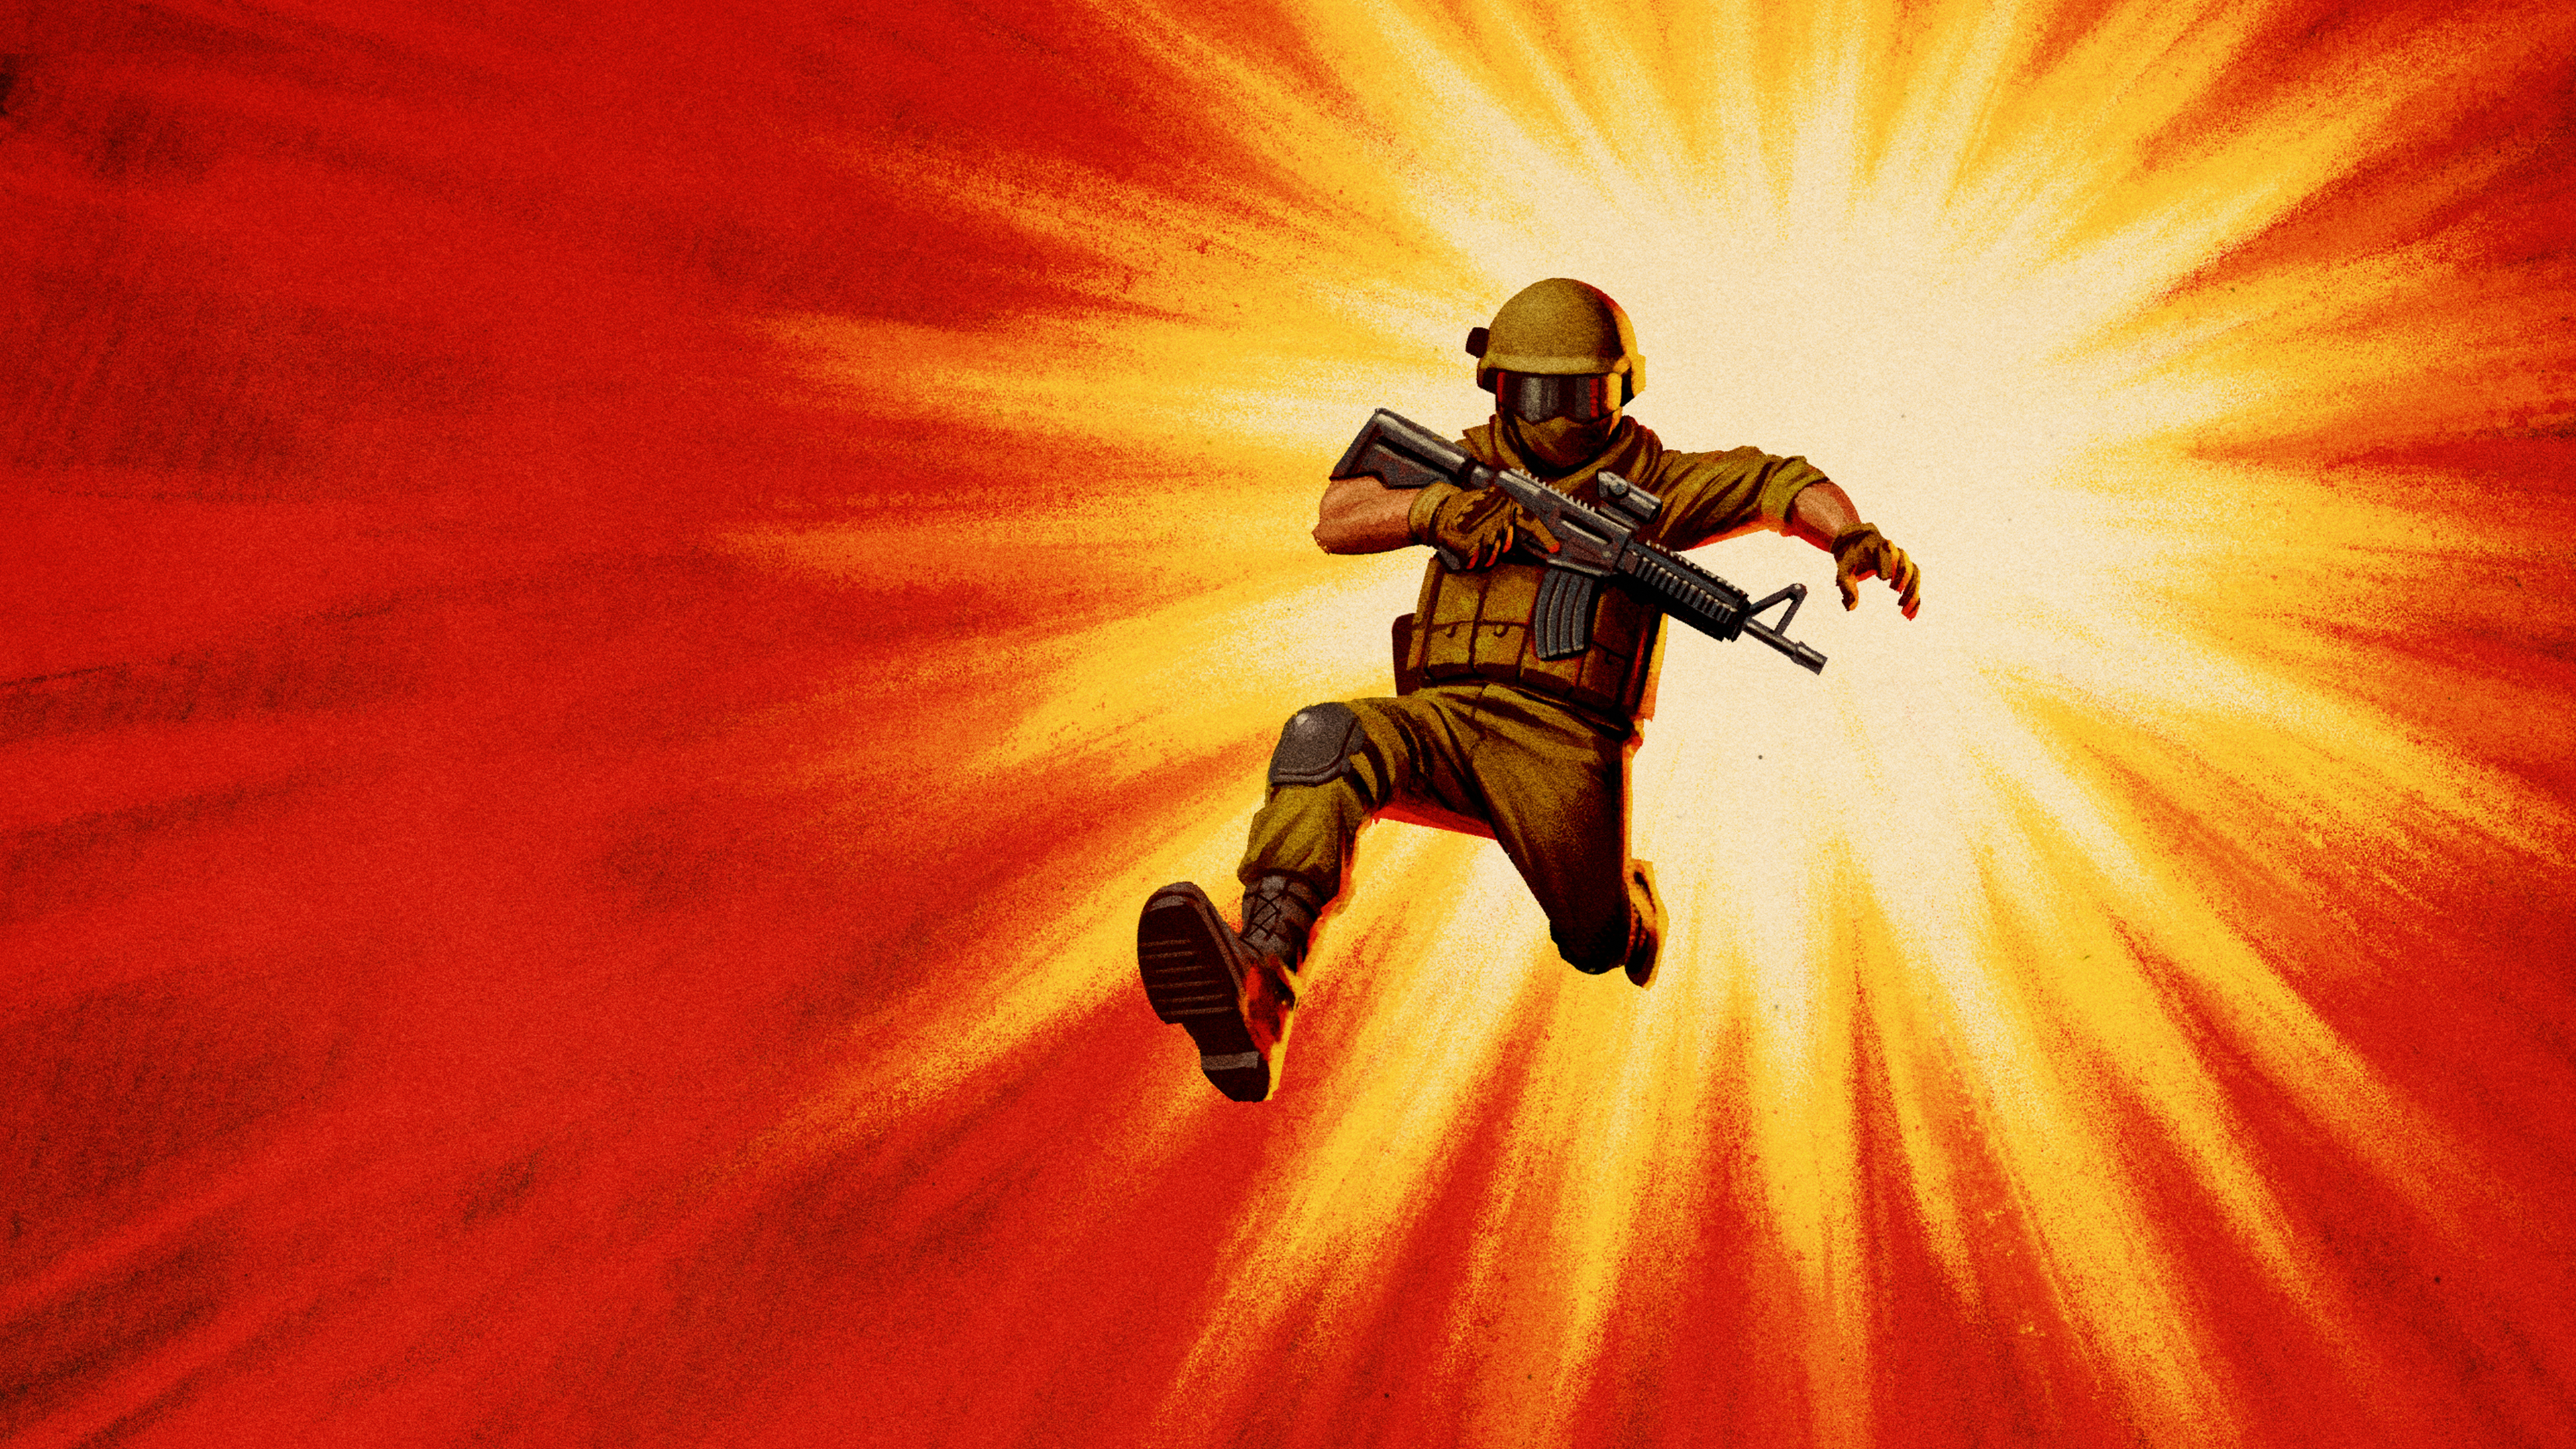 Illustration Soldier Red Background Weapon Military Artwork 3840x2160